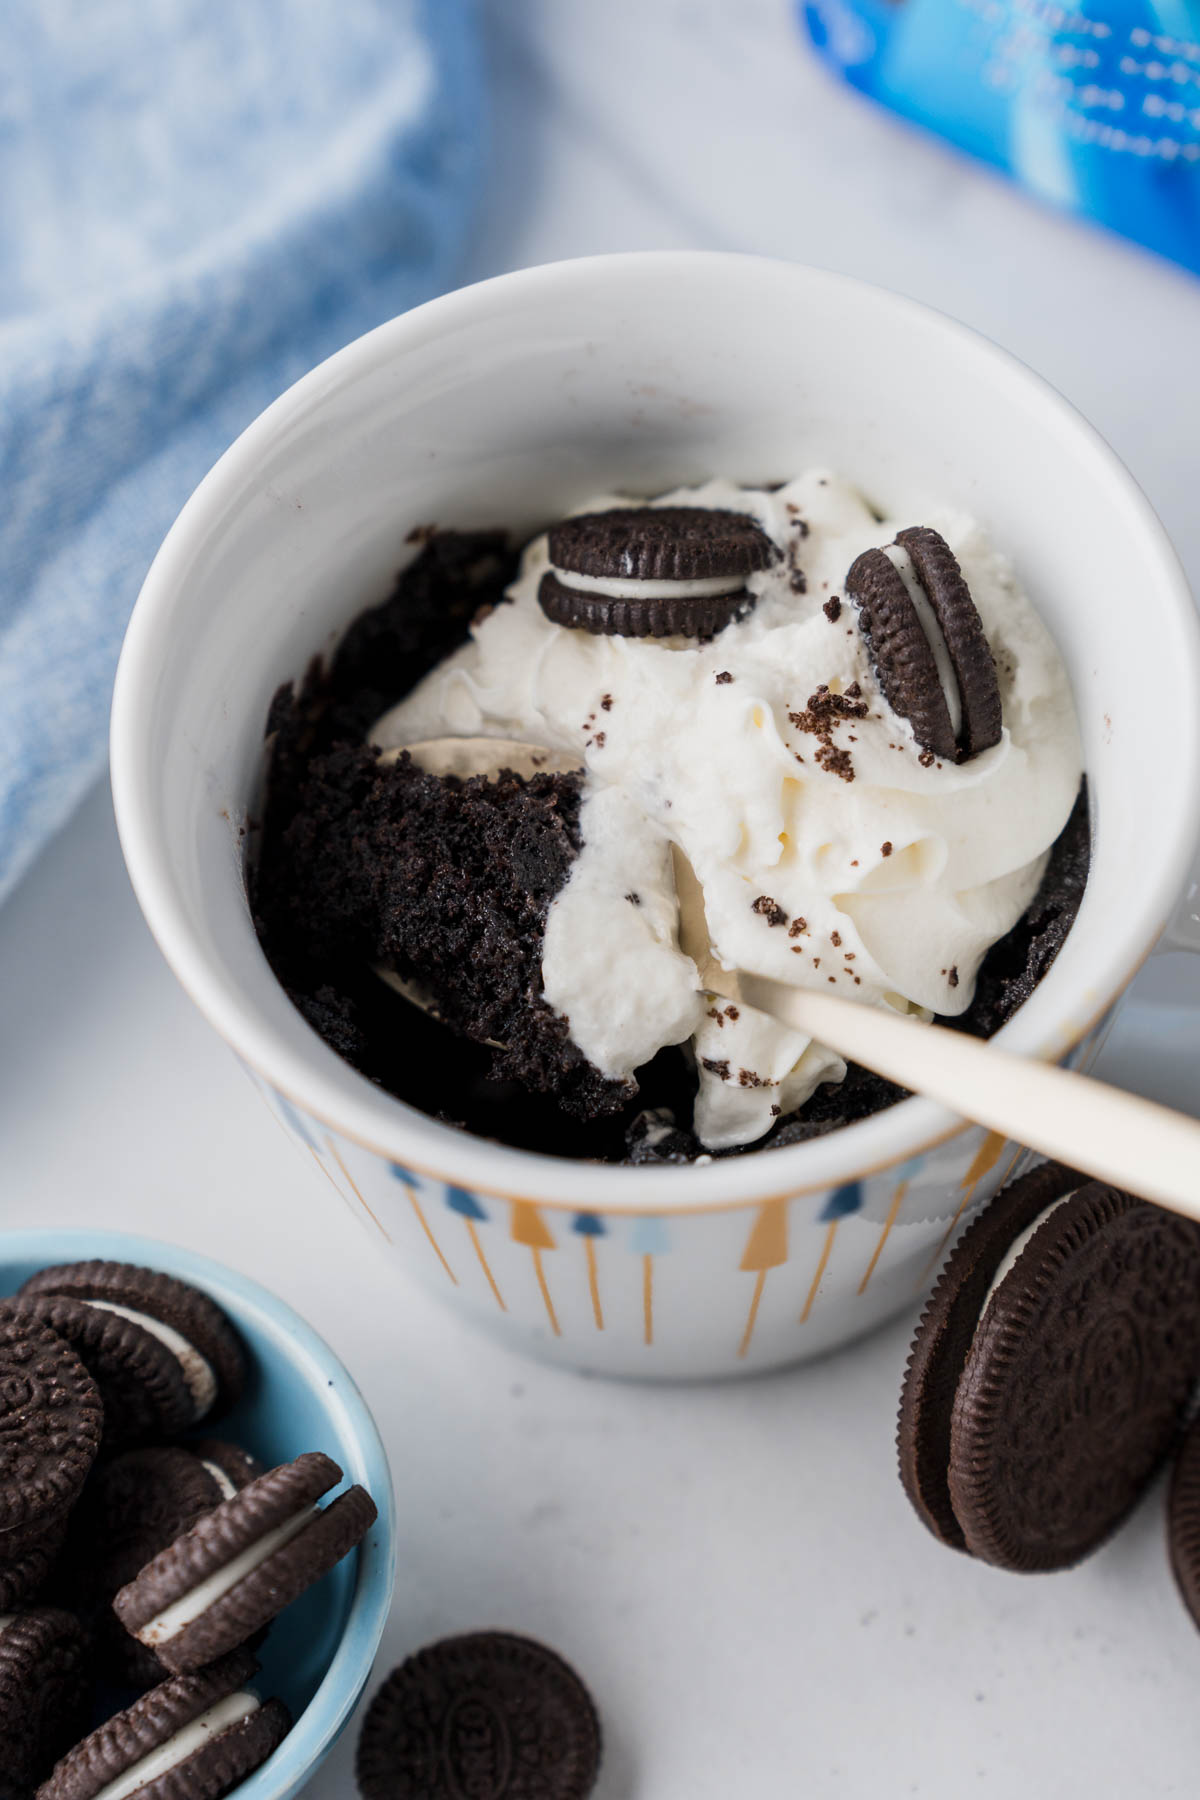 oreo mu cake is being scooped with a spoon.